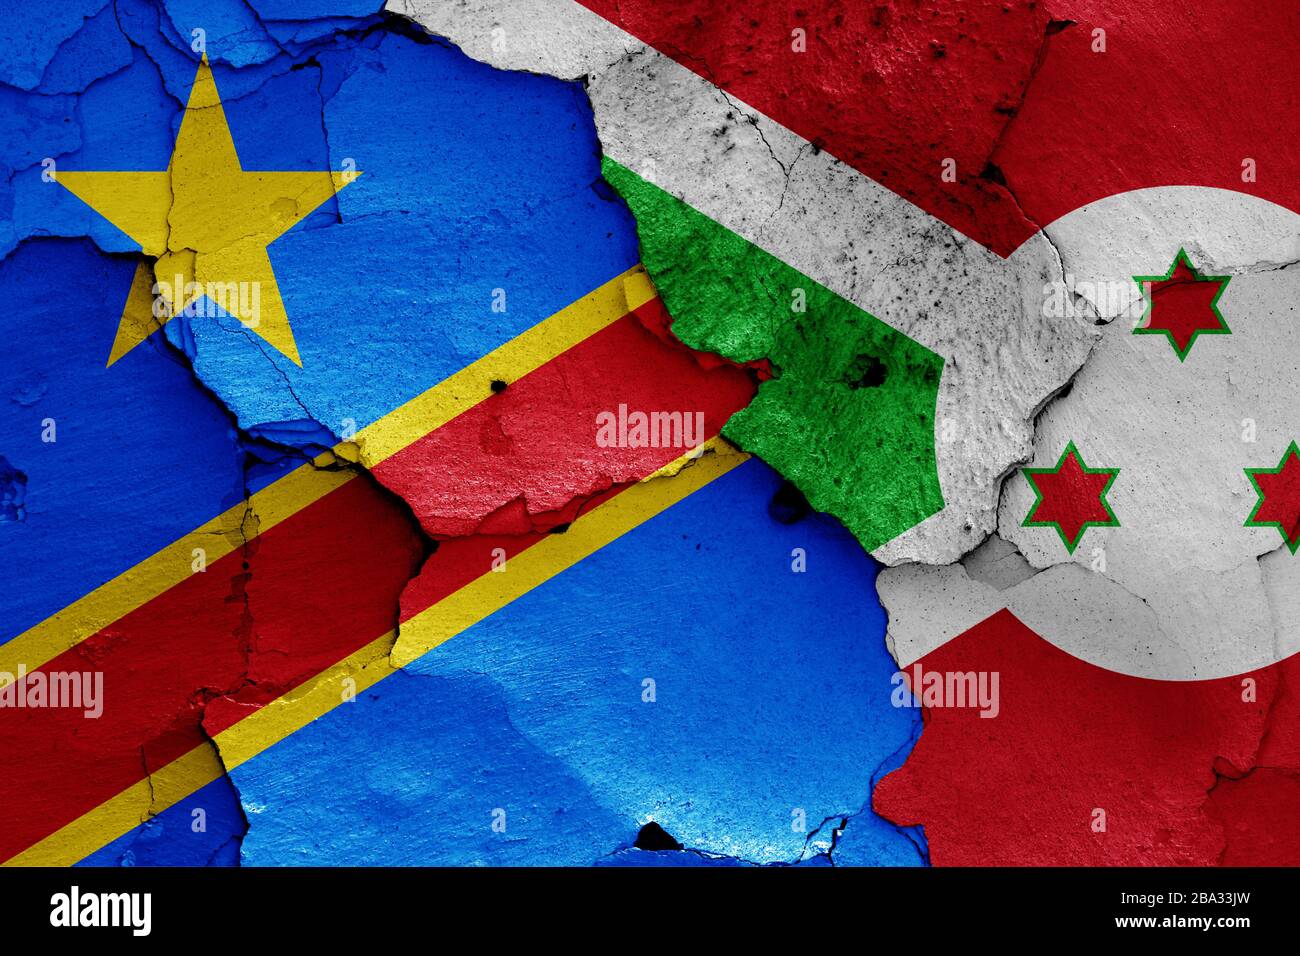 Dr Congo Flag High Resolution Stock Photography and Images - Alamy